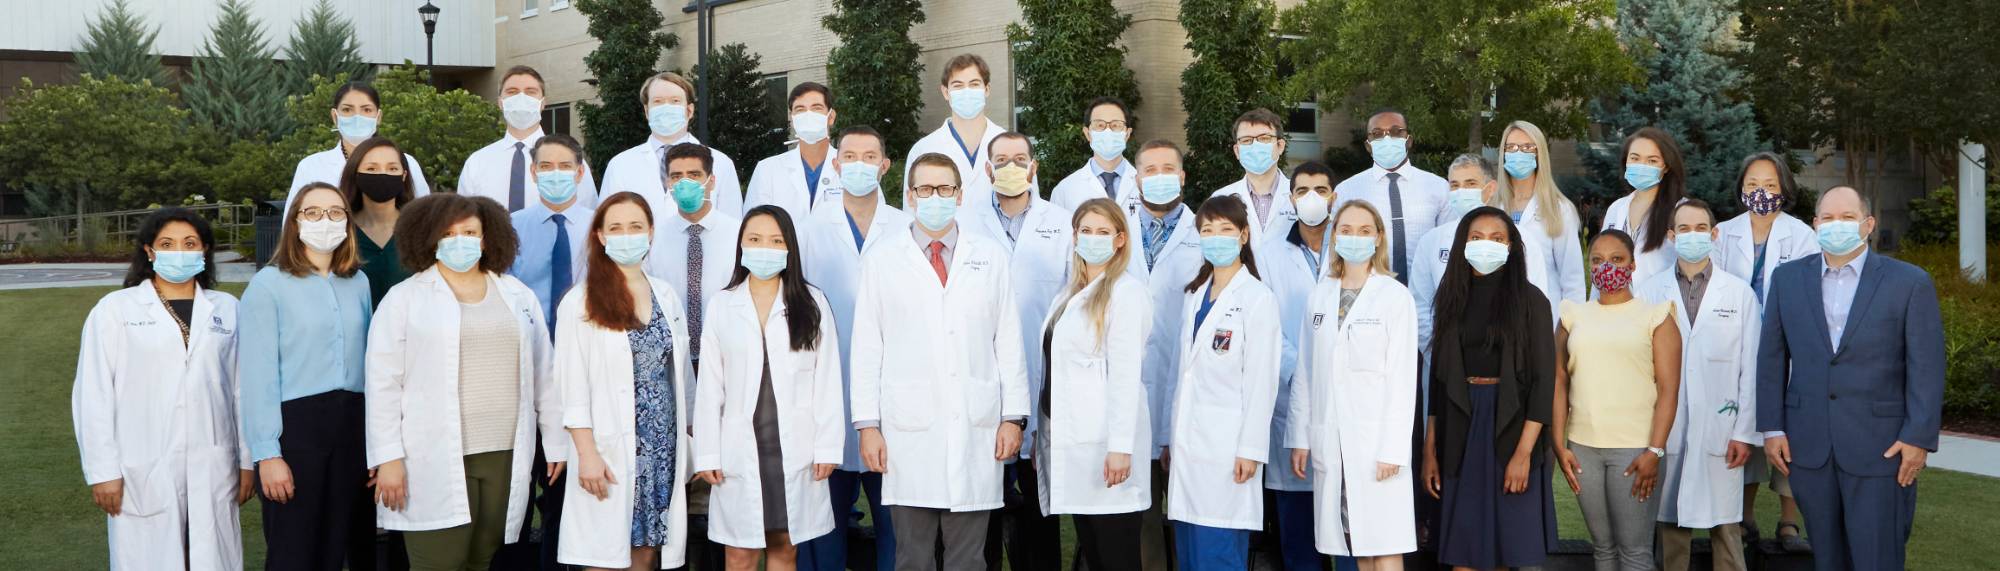 Gen_surgery residency with masks